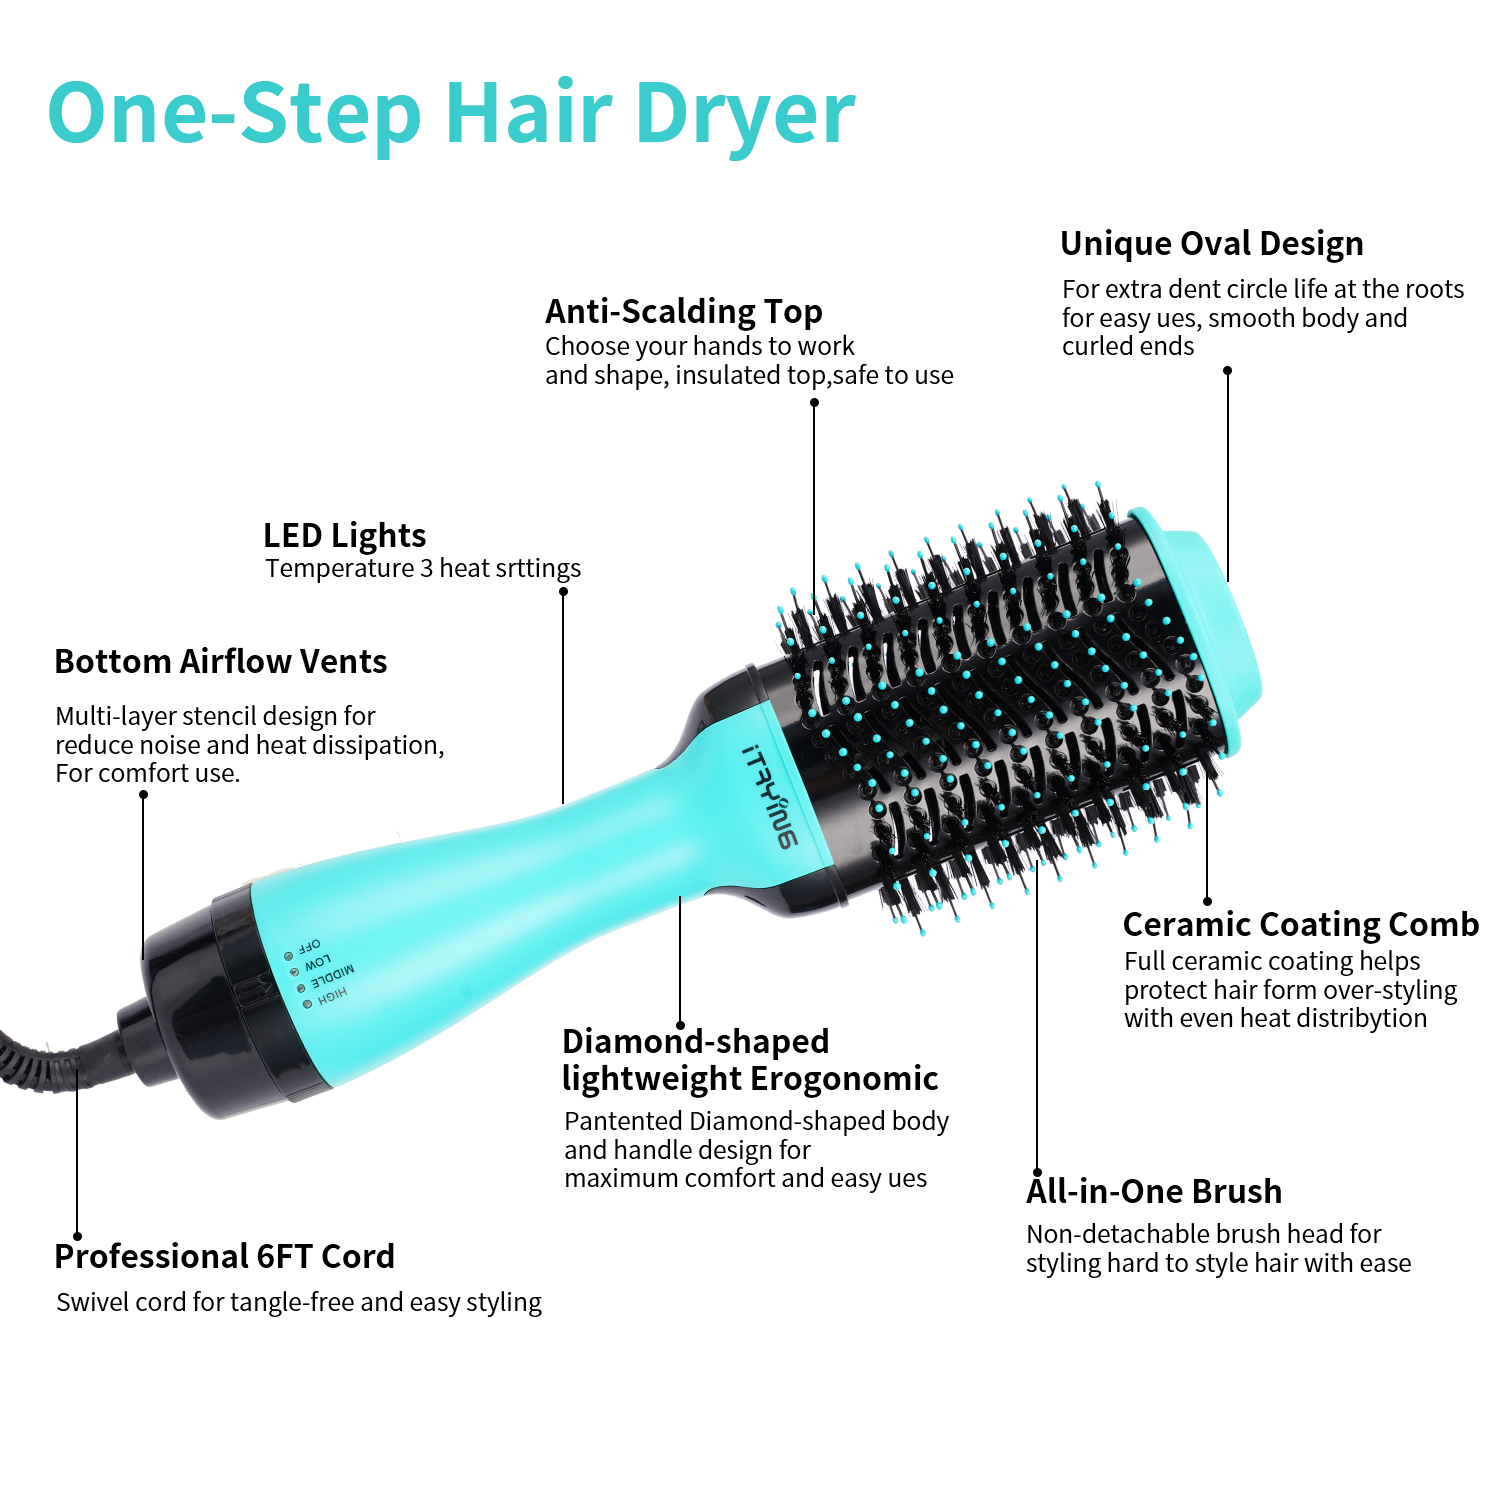 Hair Dryer and Styling Blow Dryer Professional Salon Hot Air Brush and 3-in-1 Straightening&Curving Brush